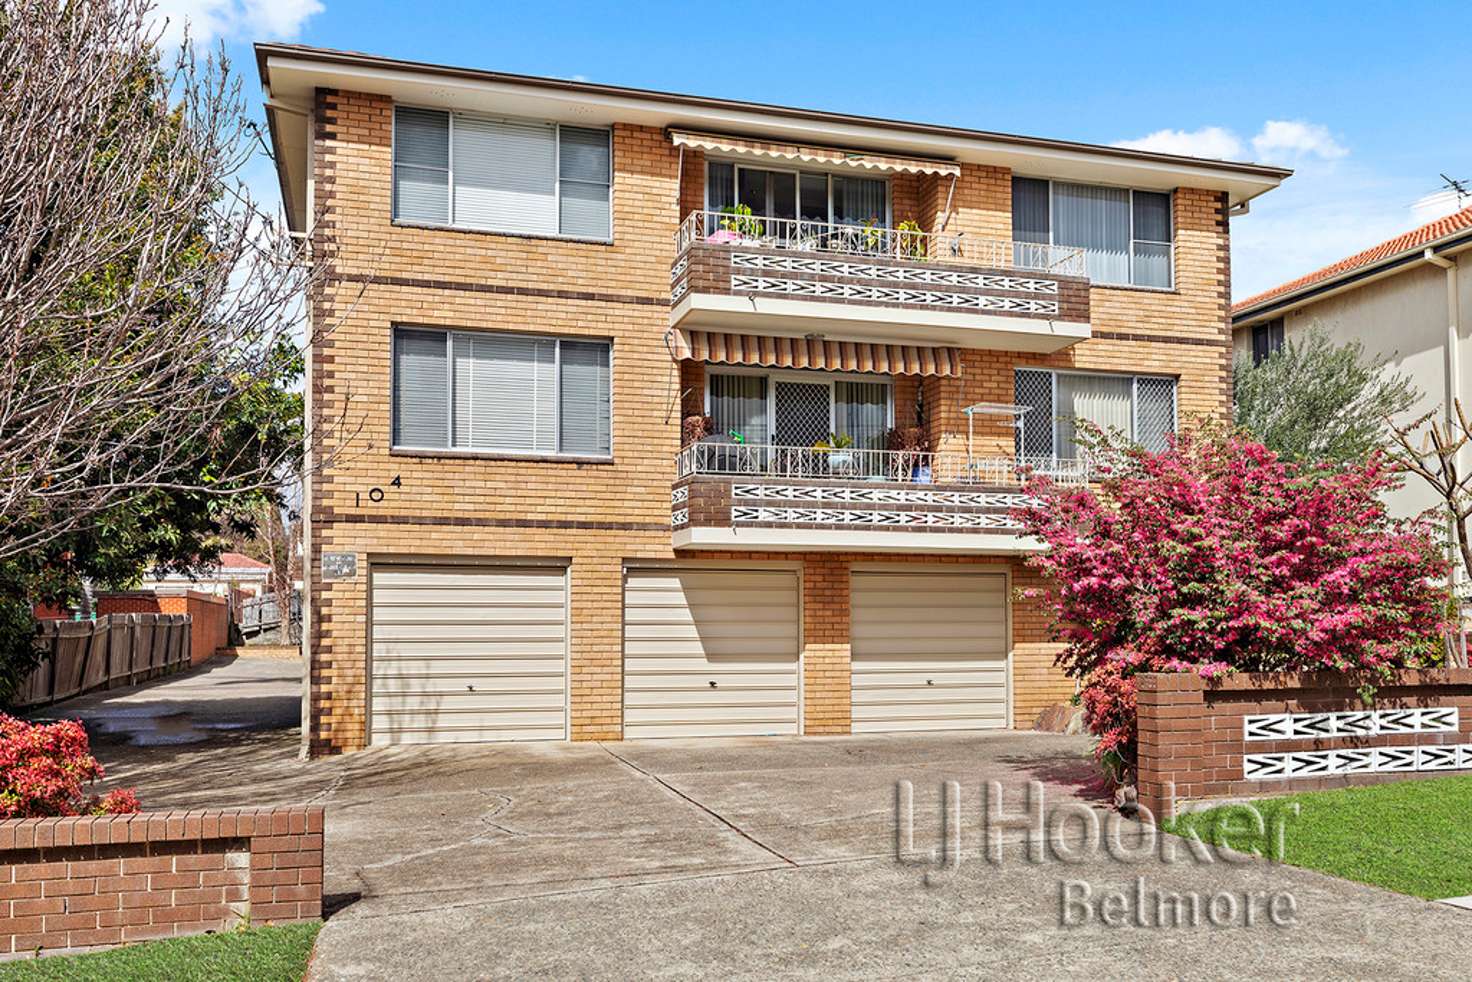 Main view of Homely apartment listing, 10/104 Leylands Parade, Belmore NSW 2192